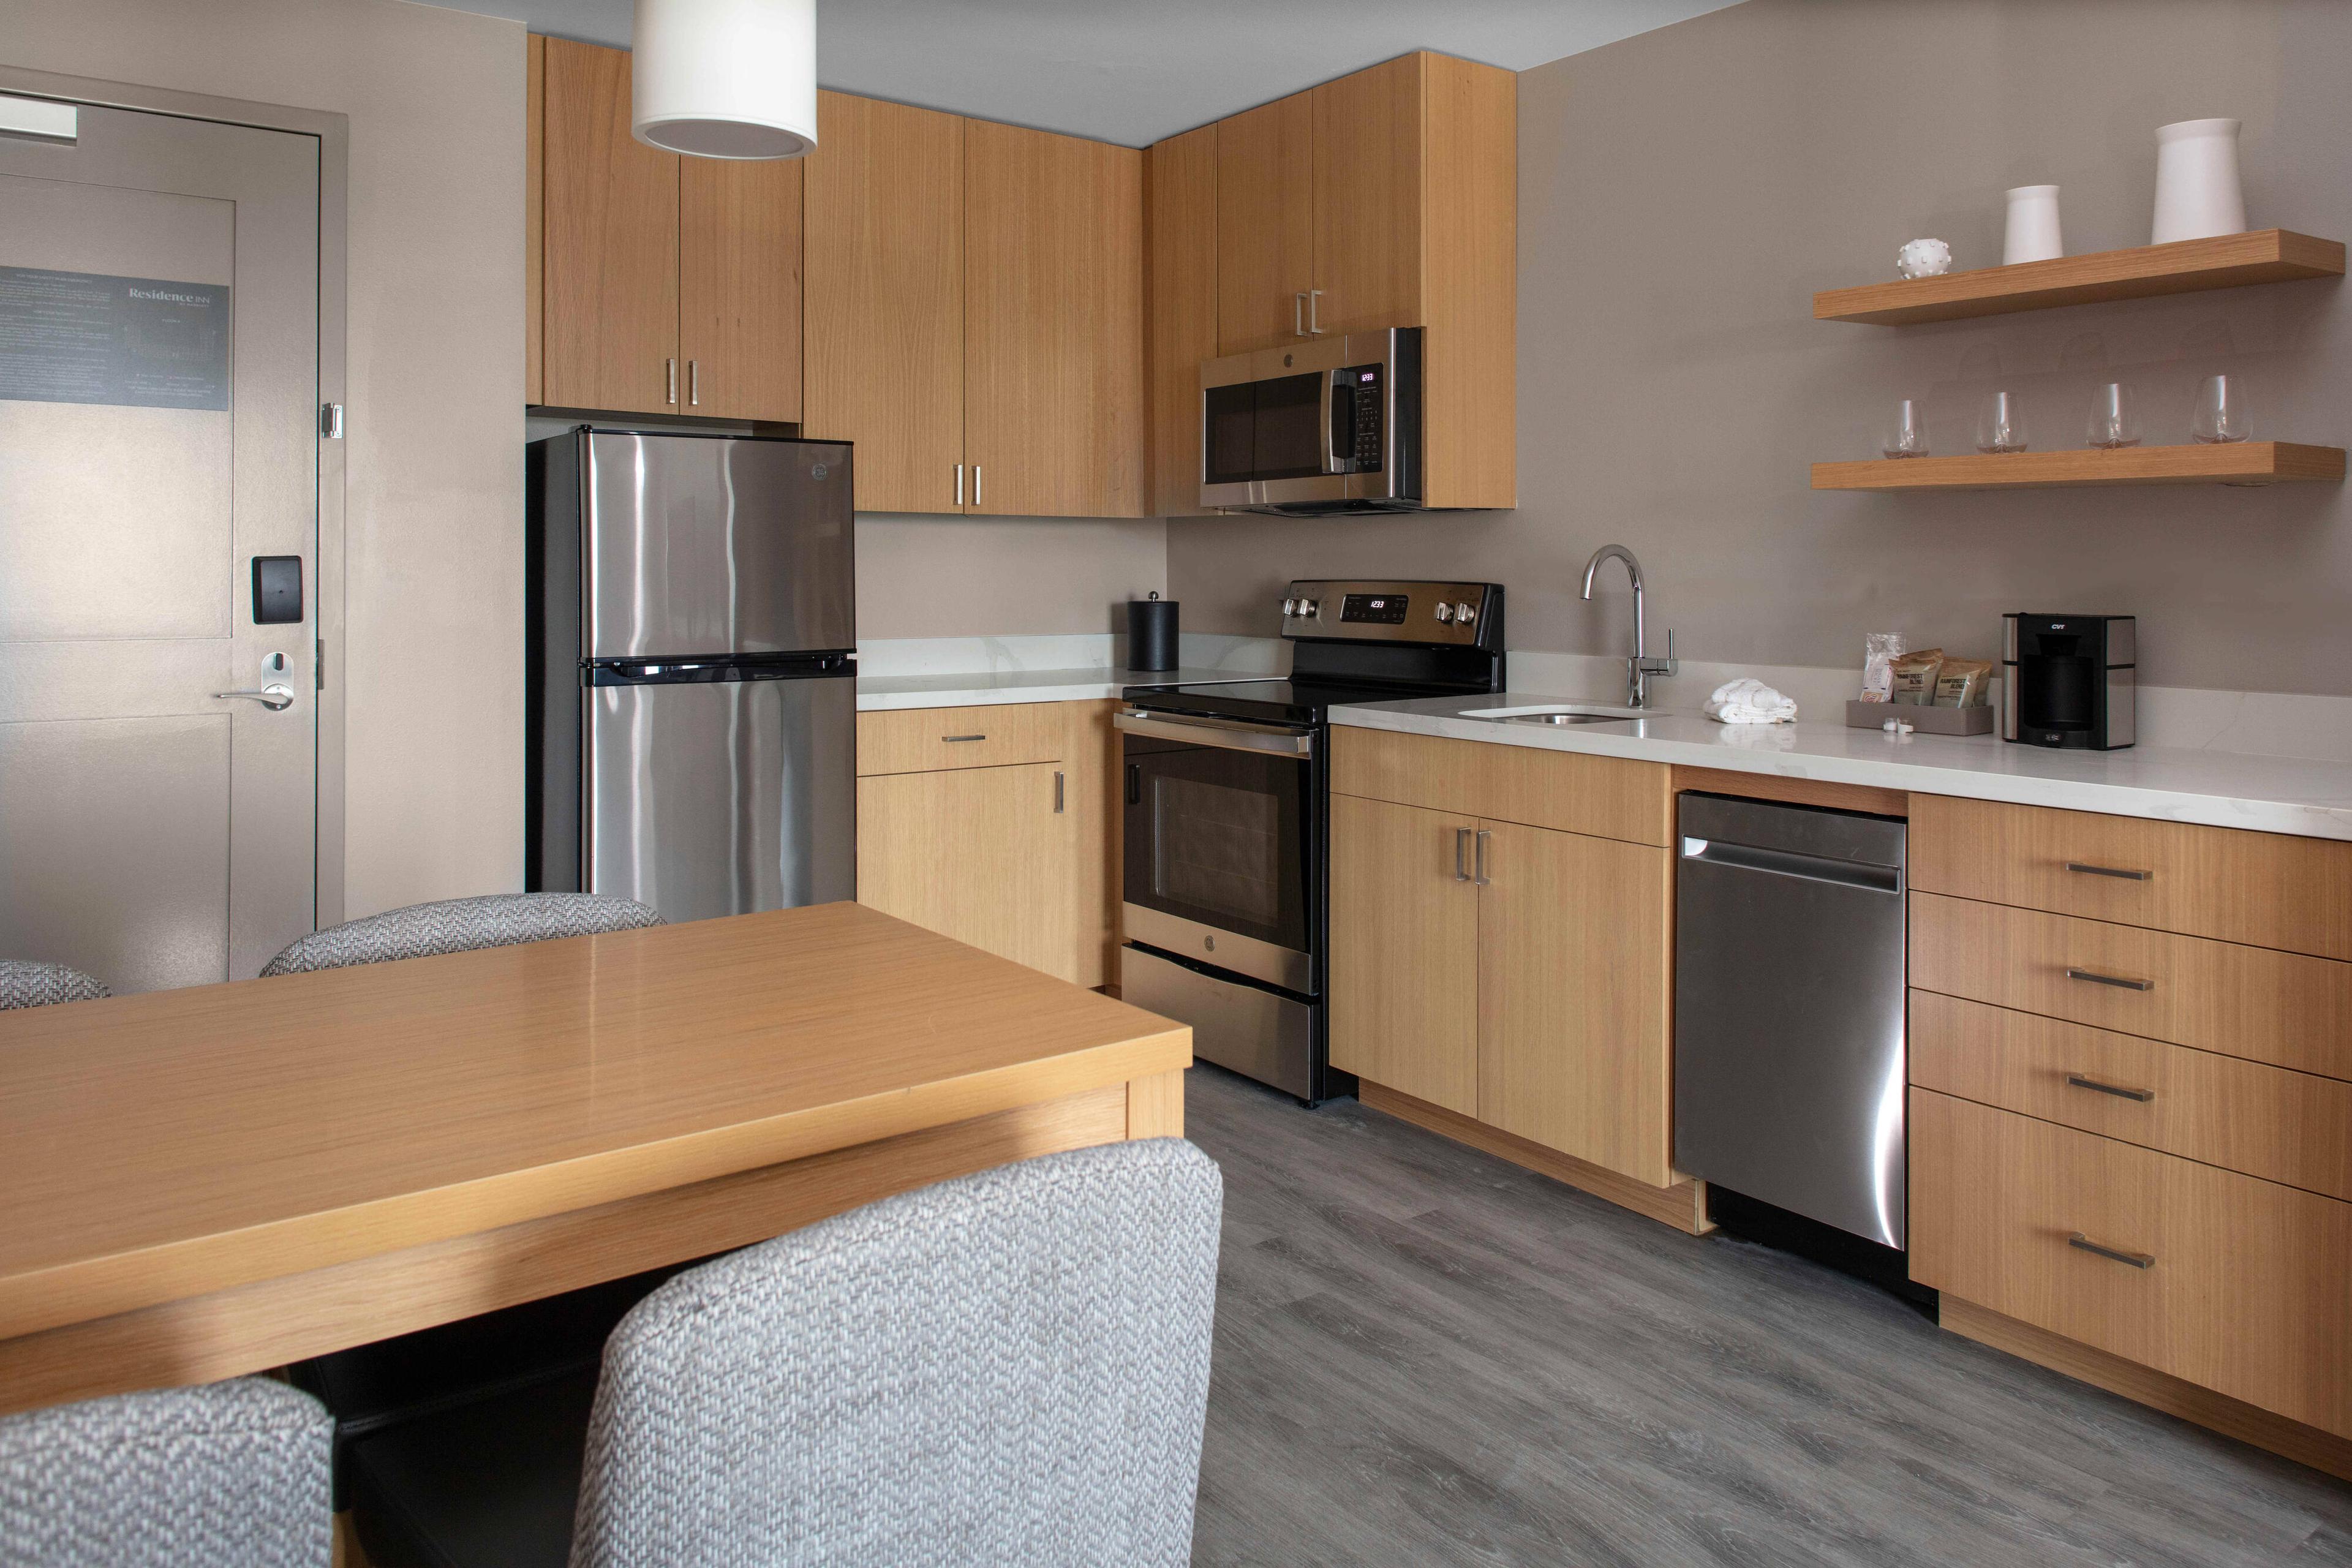 After a busy day enjoy the convenience of a fully equipped kitchen in our one bedroom suites.